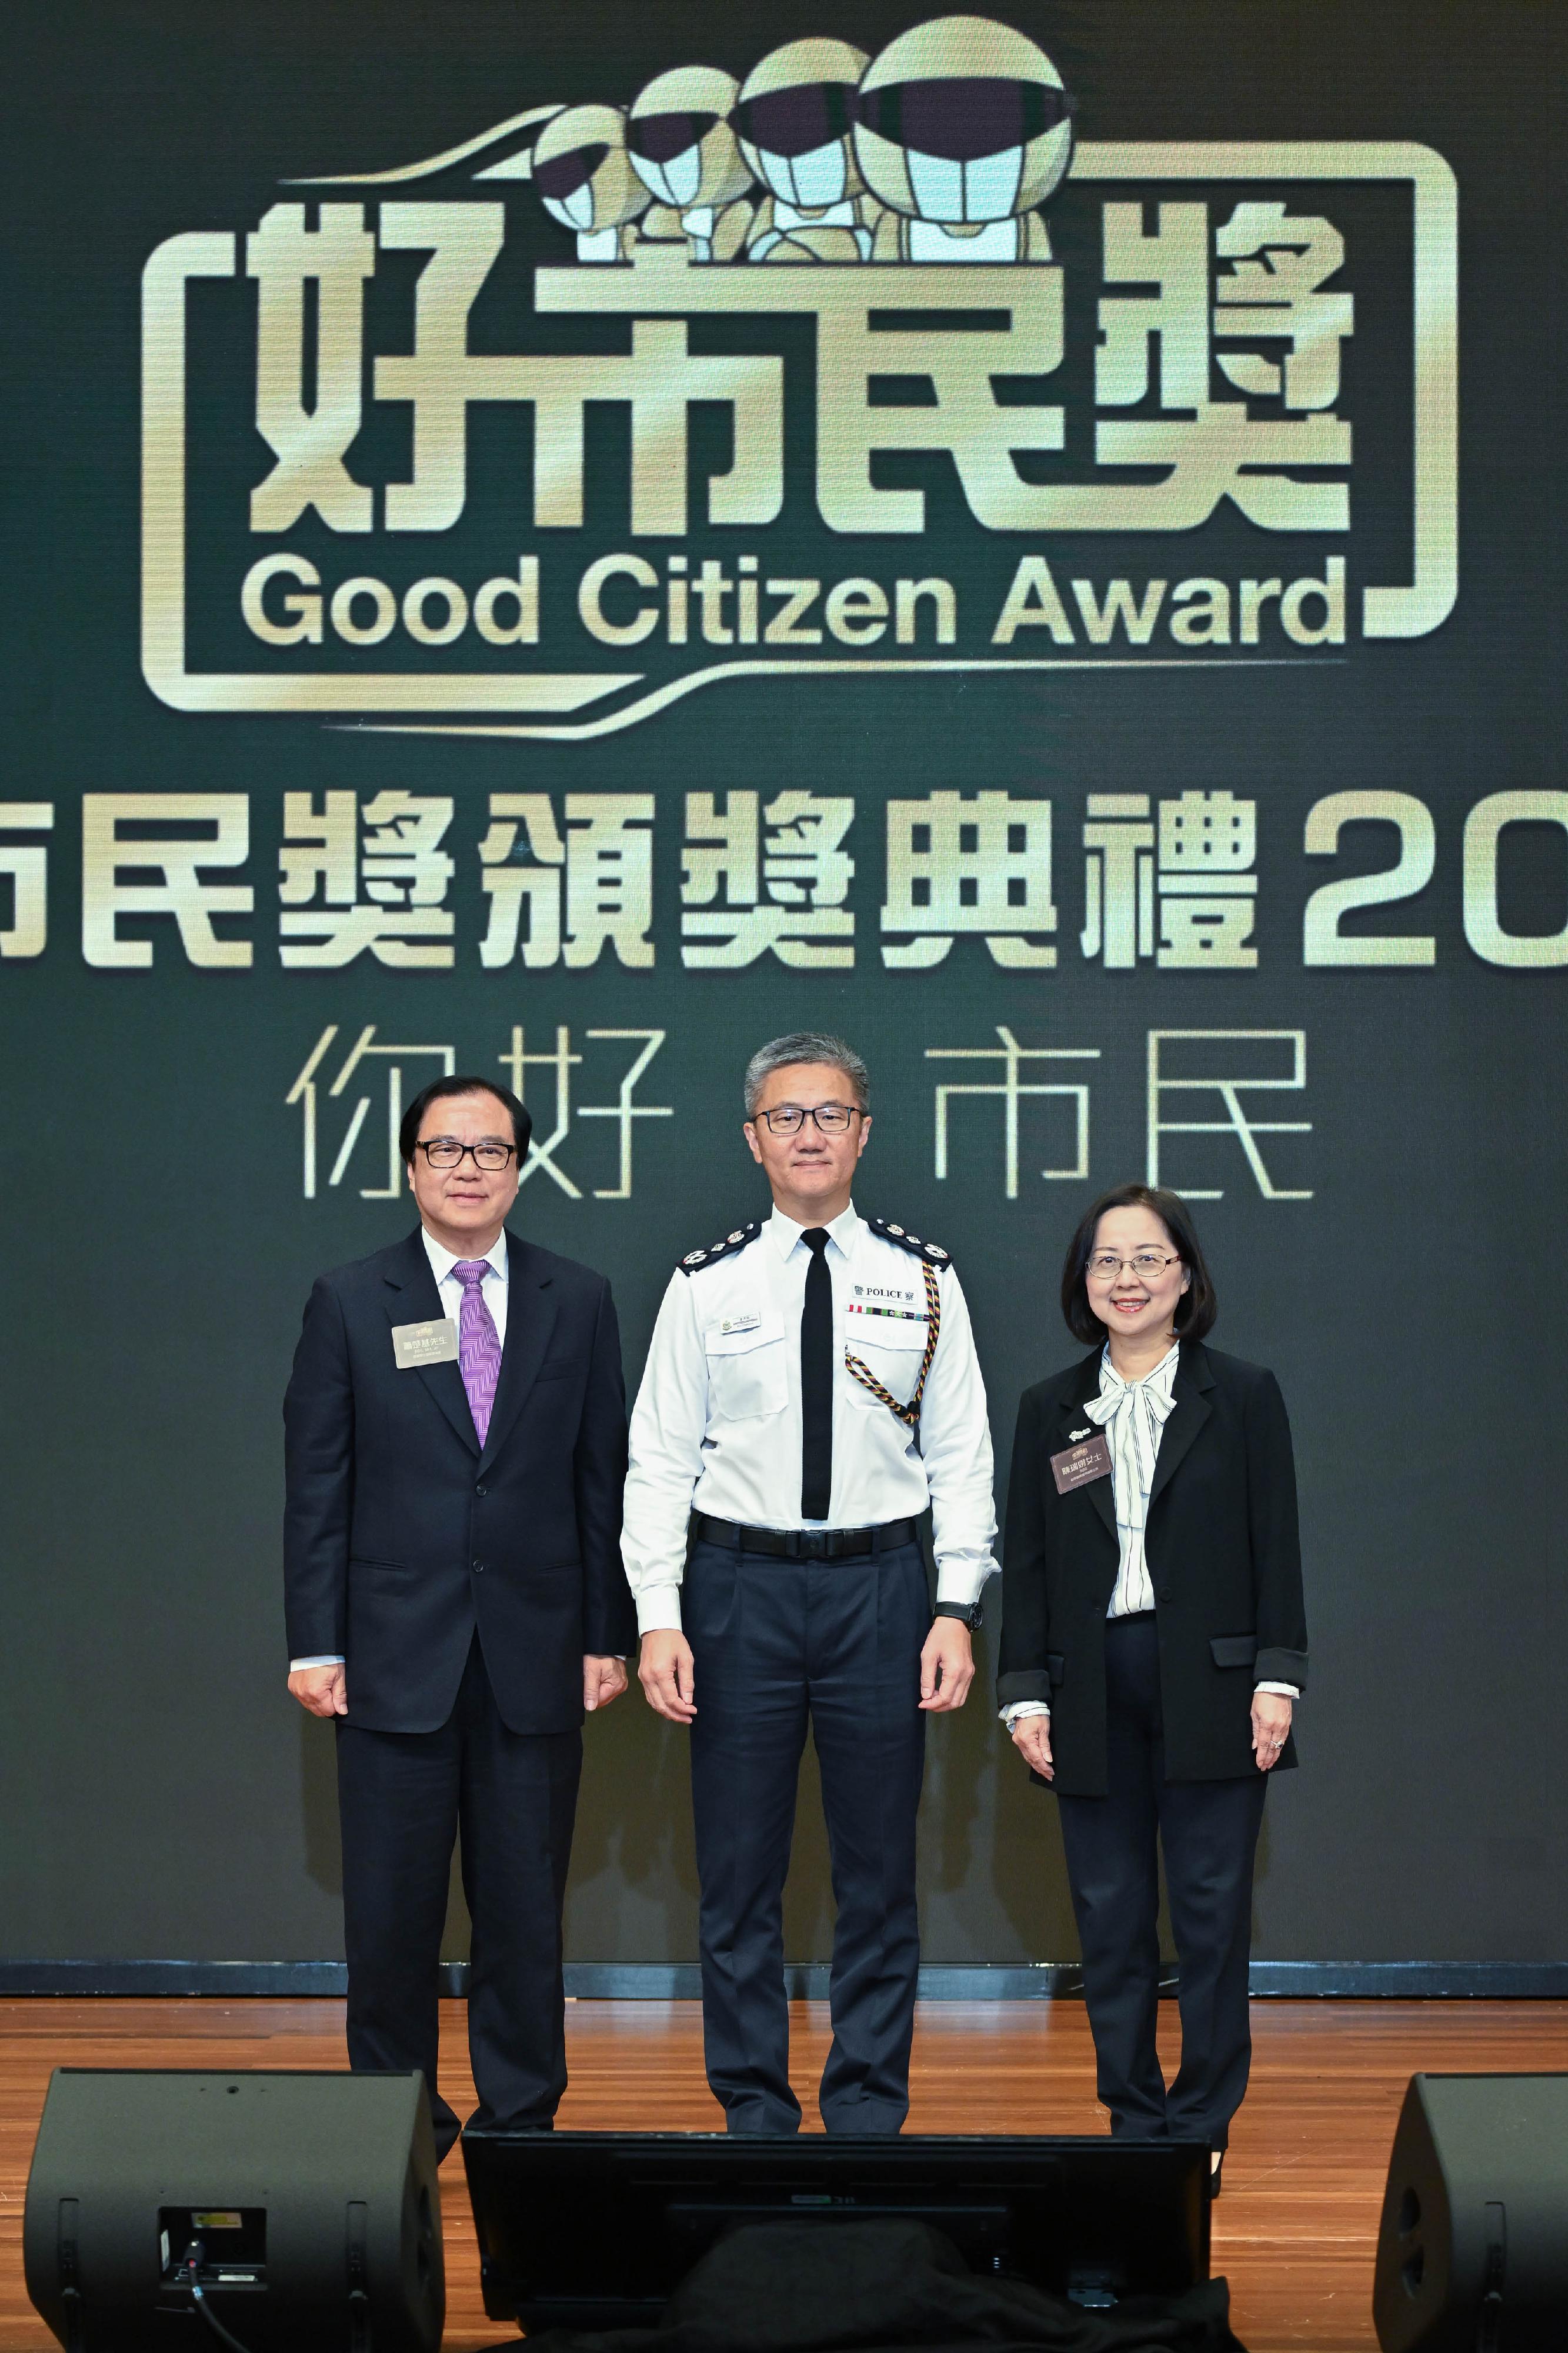 The Good Citizen Award Presentation Ceremony 2023 was held today (March 17). Photo shows (from left) member of the Fight Crime Committee, Mr Siu Chor-kee; the Deputy Chairman of the Hong Kong General Chamber of Commerce, Ms Agnes Chan; and the Commissioner of Police, Mr Siu Chak-yee officiating at the ceremony.